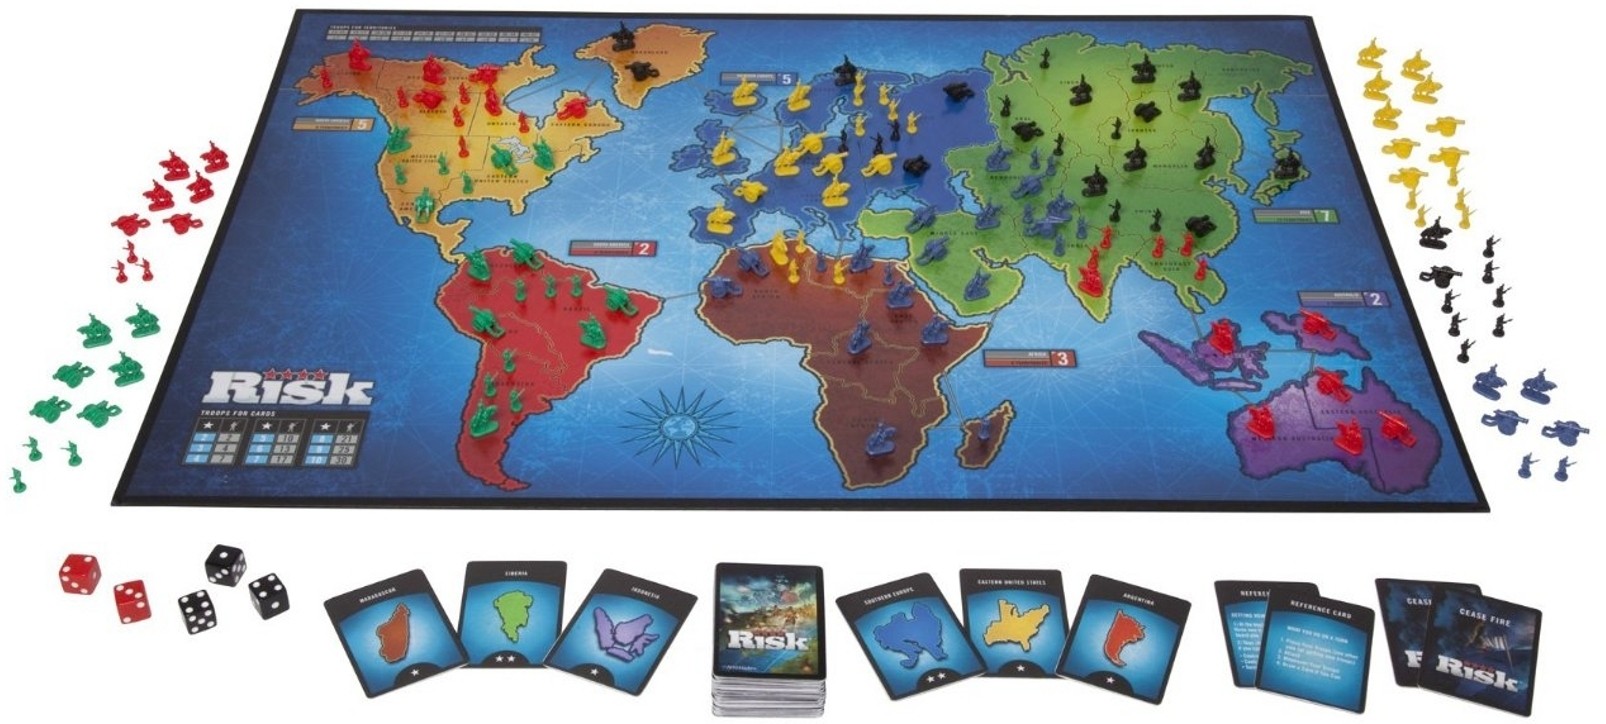 Area Budaya Risk Board Game Review Board Game Reviewed